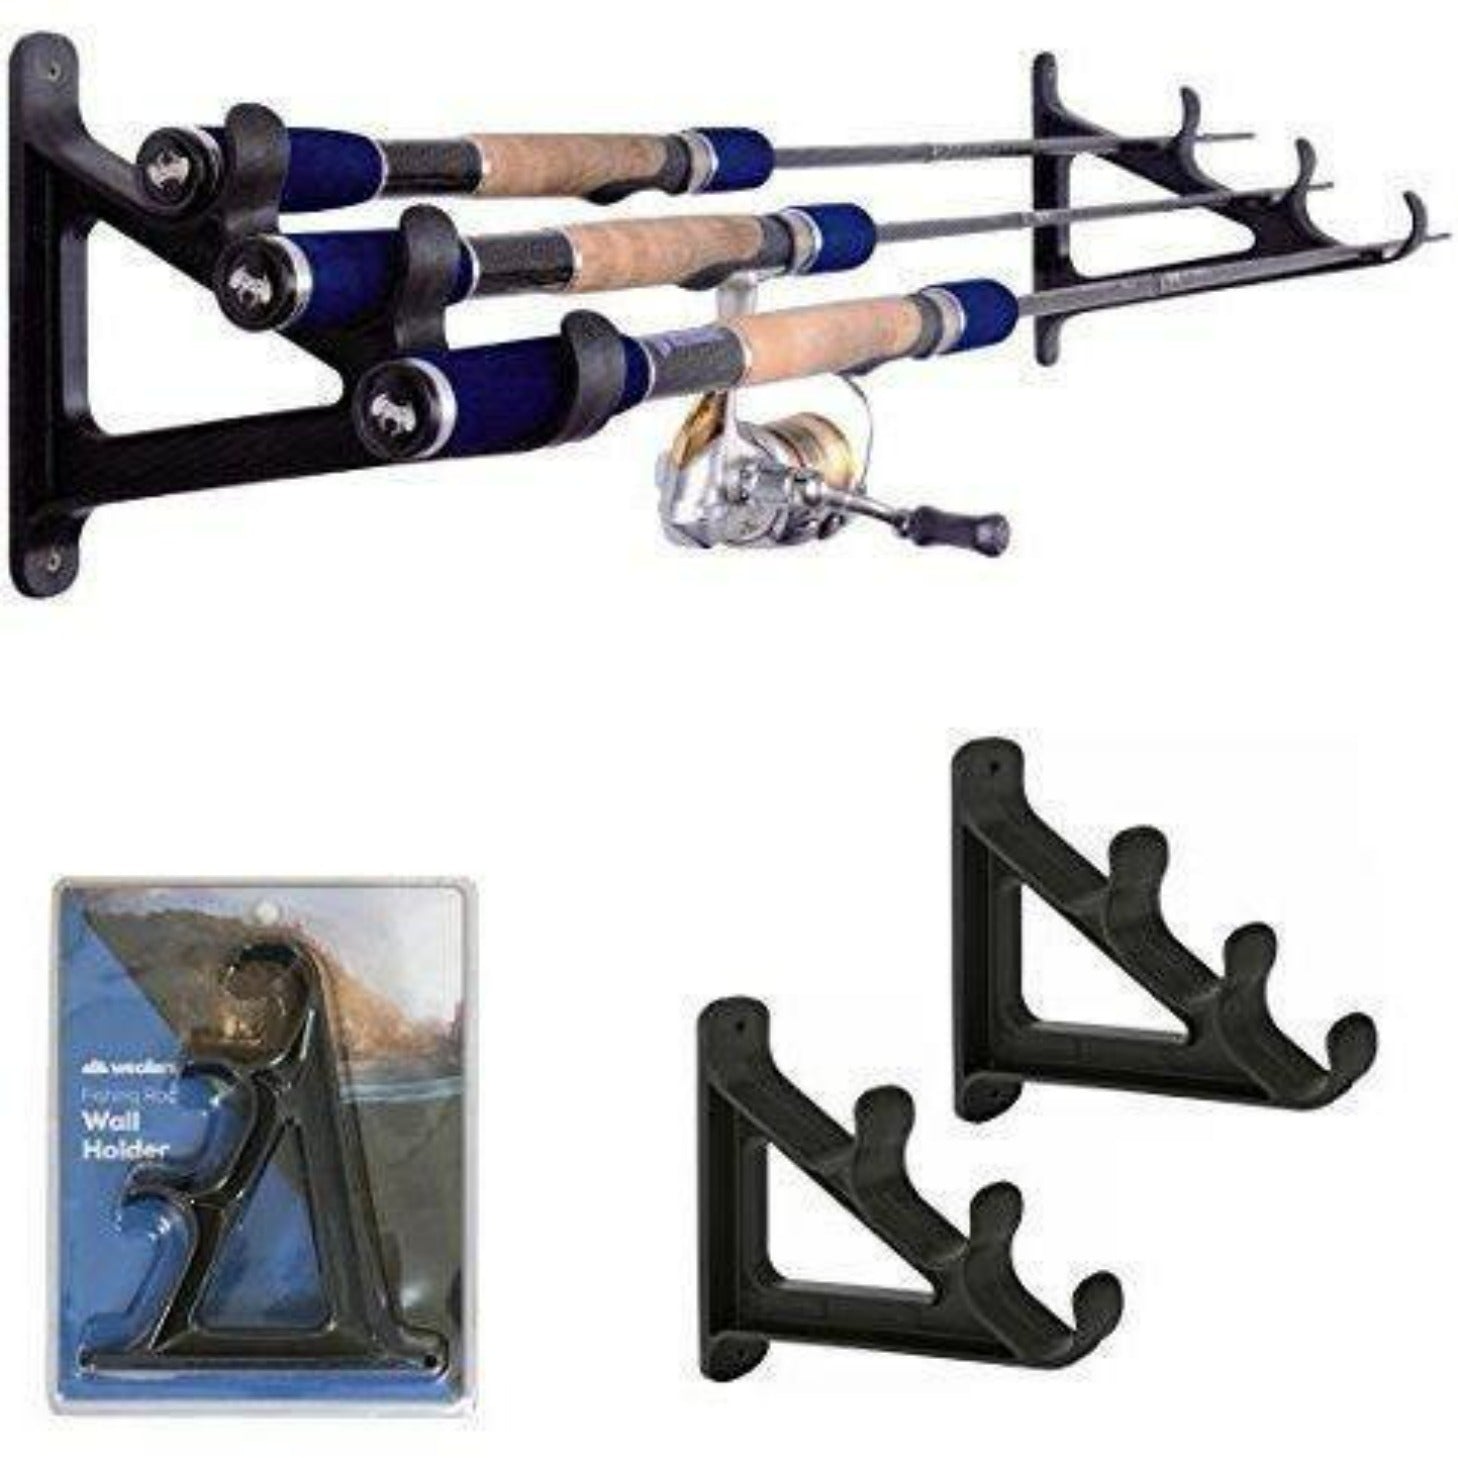 KSWLOR Fishing Rod Holder Wall Mount Rod Holders for Fishing,Fishing Pole Wall Storage Rack,Fishing Rod Rack Storage Wall Mount for Garage,Cabin and